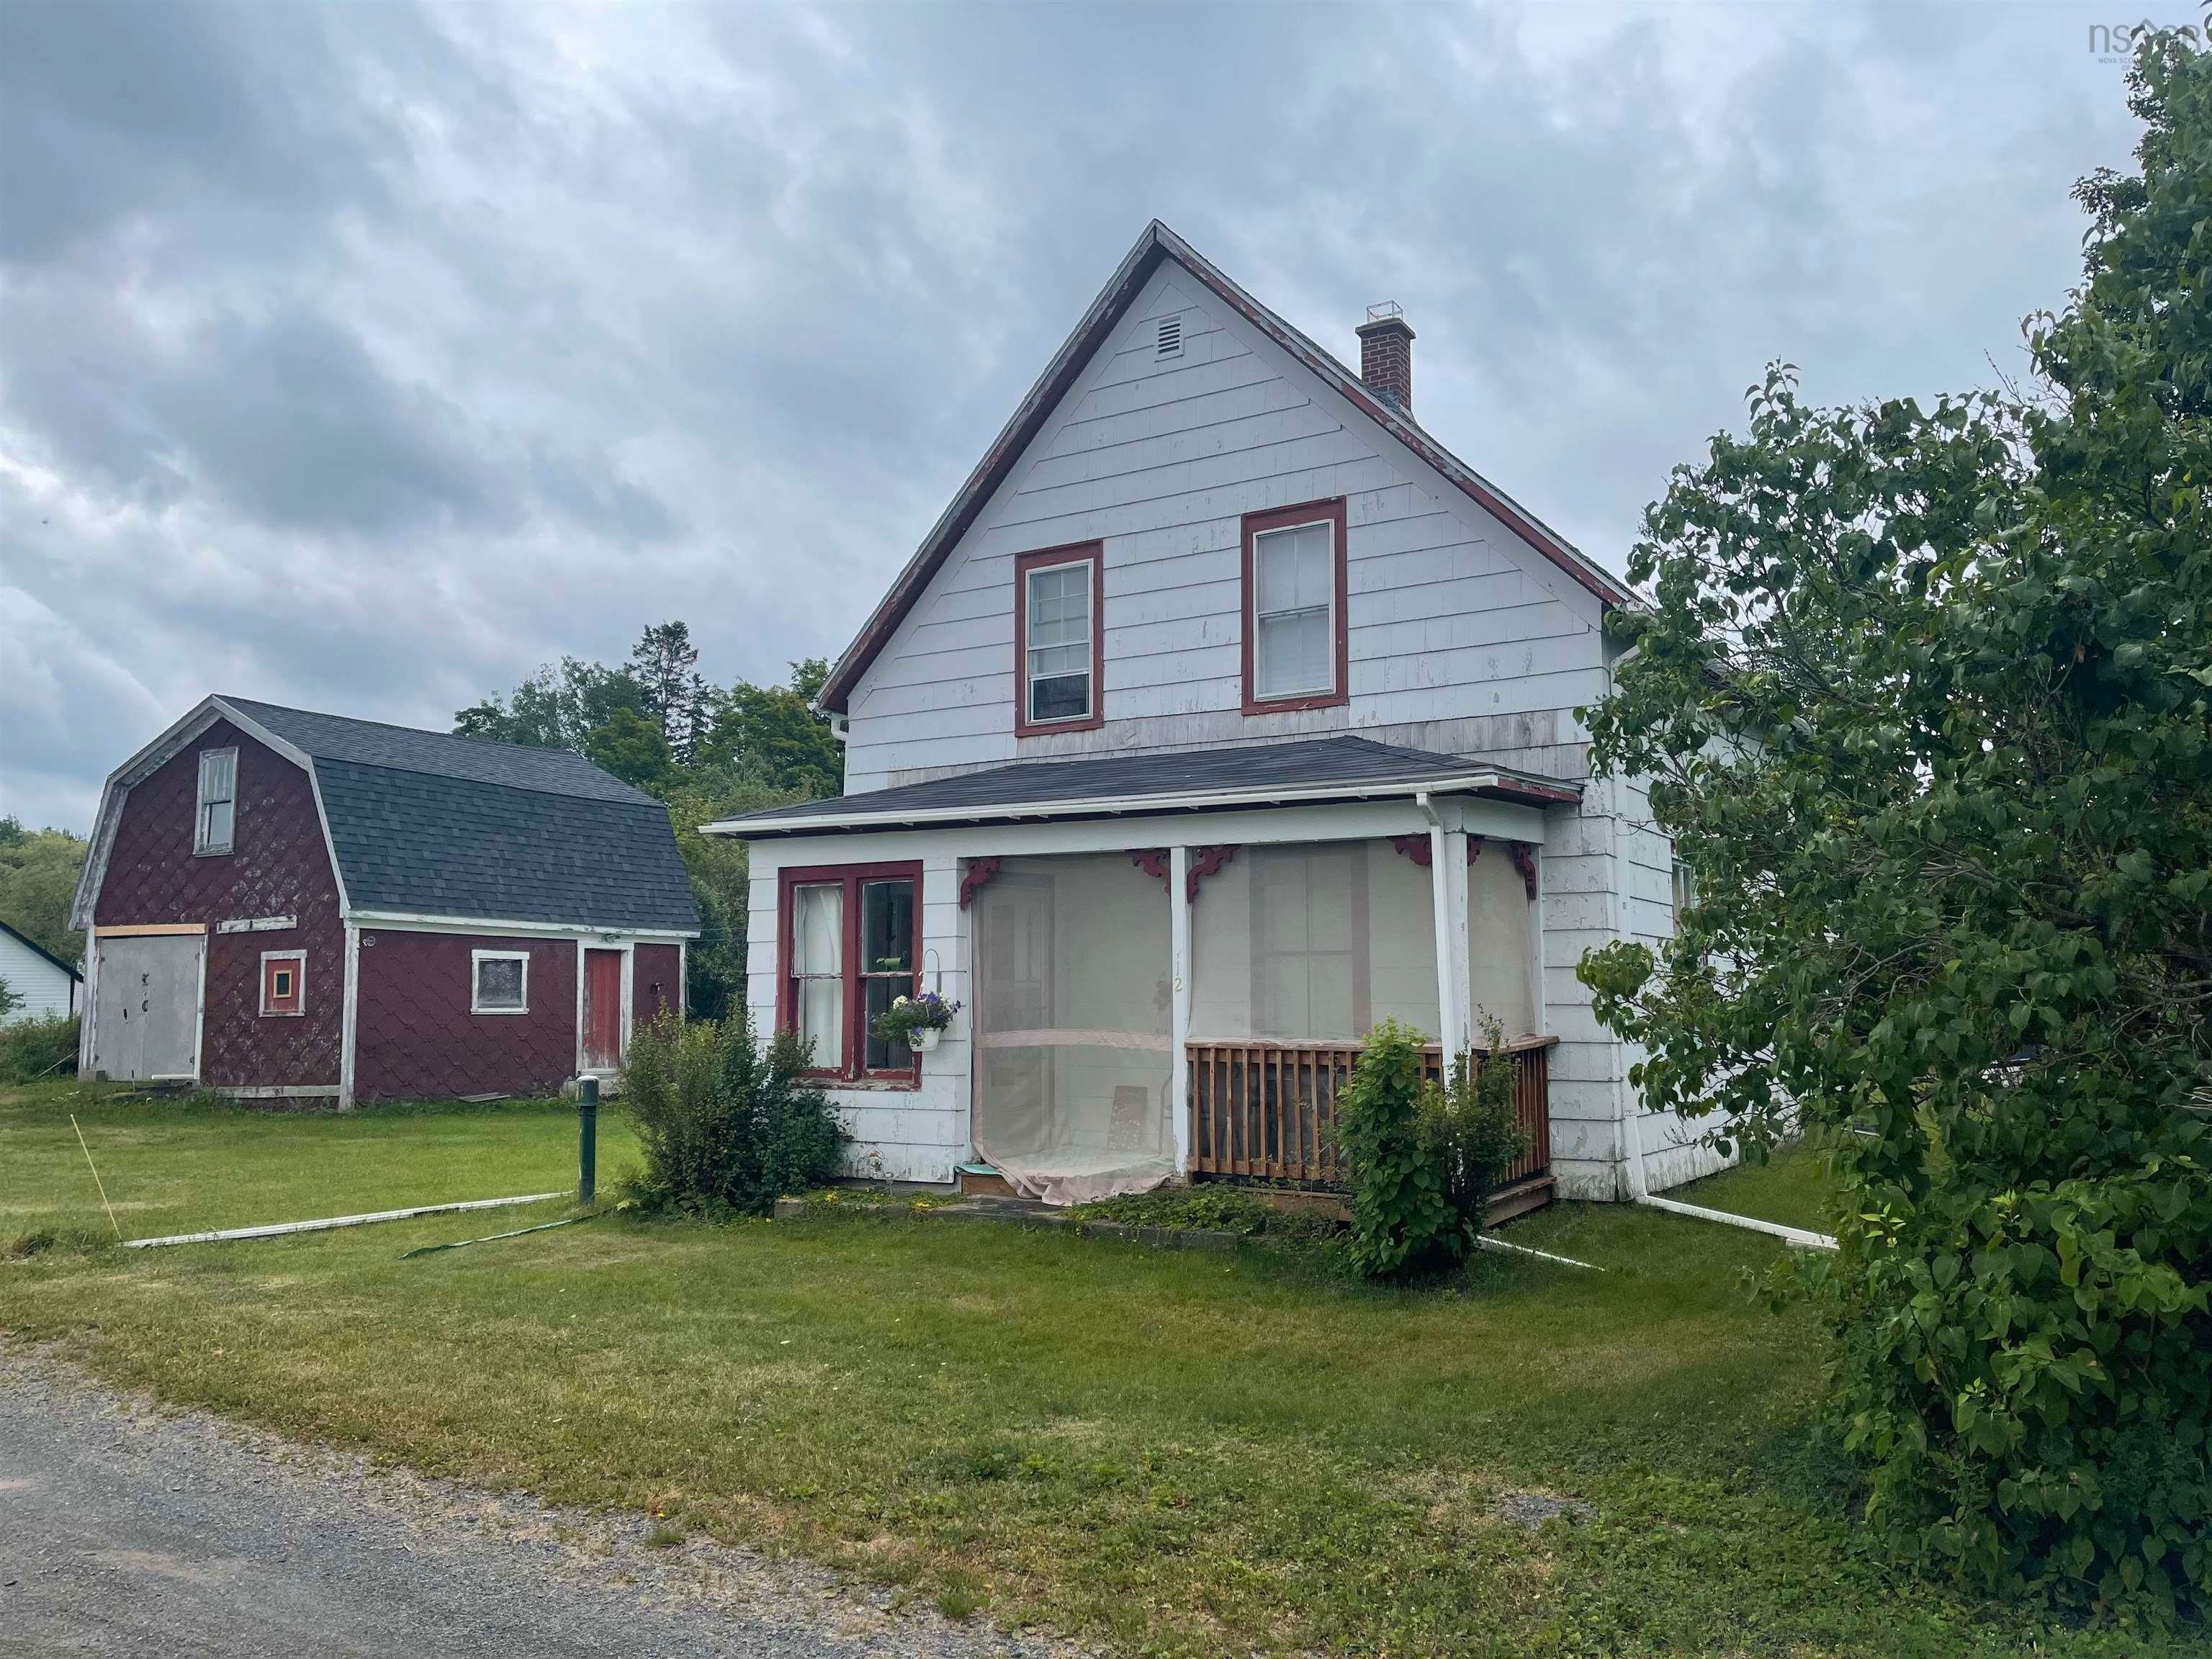 Main Photo: 12 Fortune Lane in Bridgeville: 108-Rural Pictou County Residential for sale (Northern Region)  : MLS®# 202218698